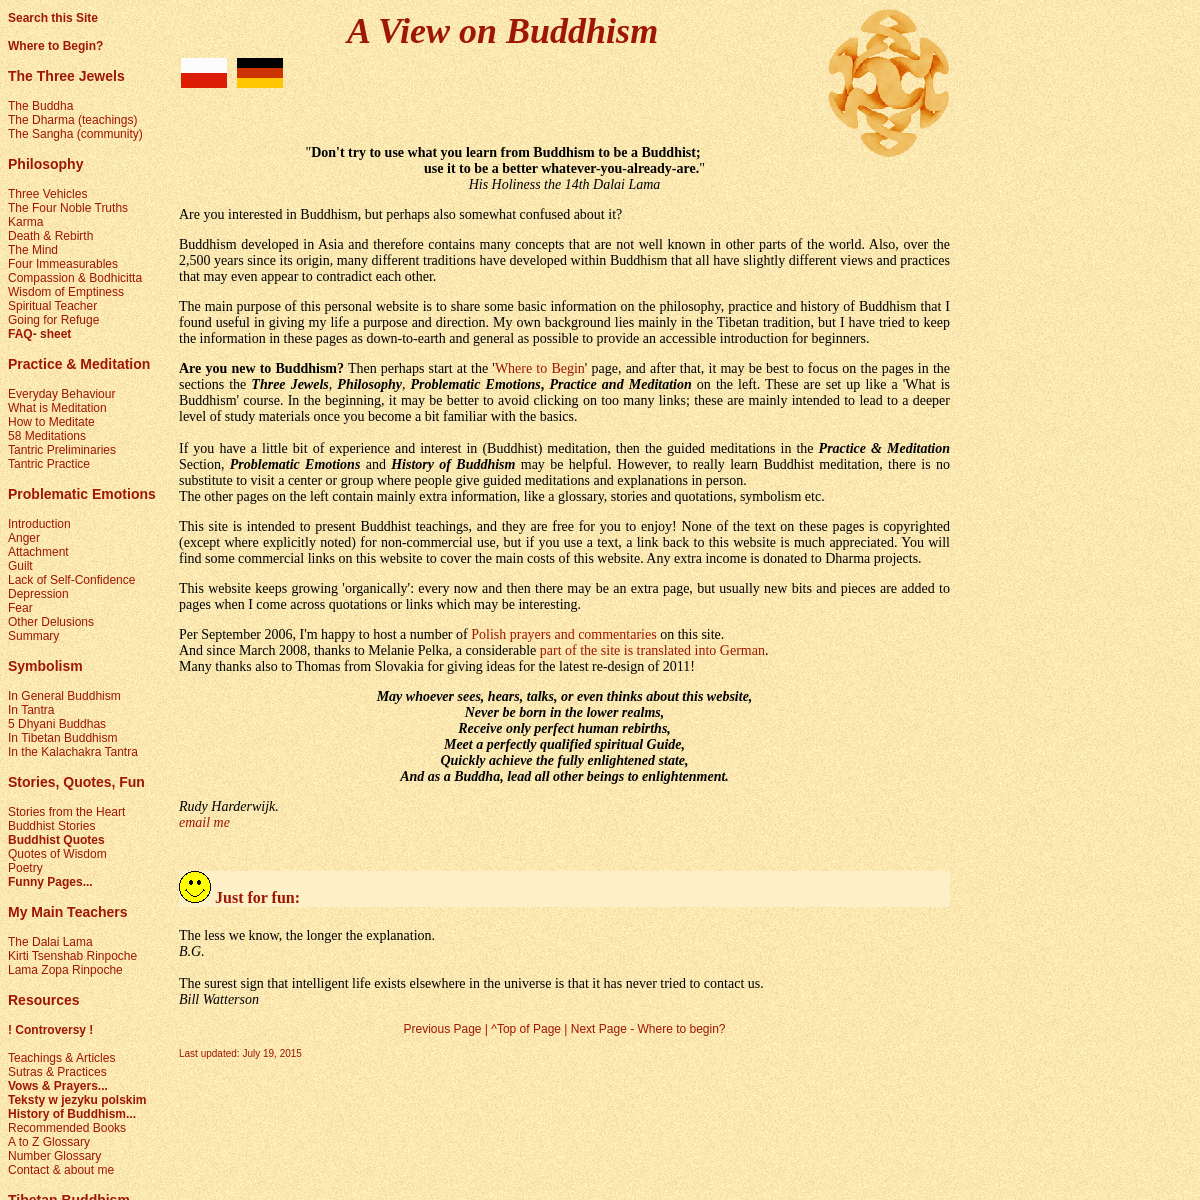 A complete backup of viewonbuddhism.org